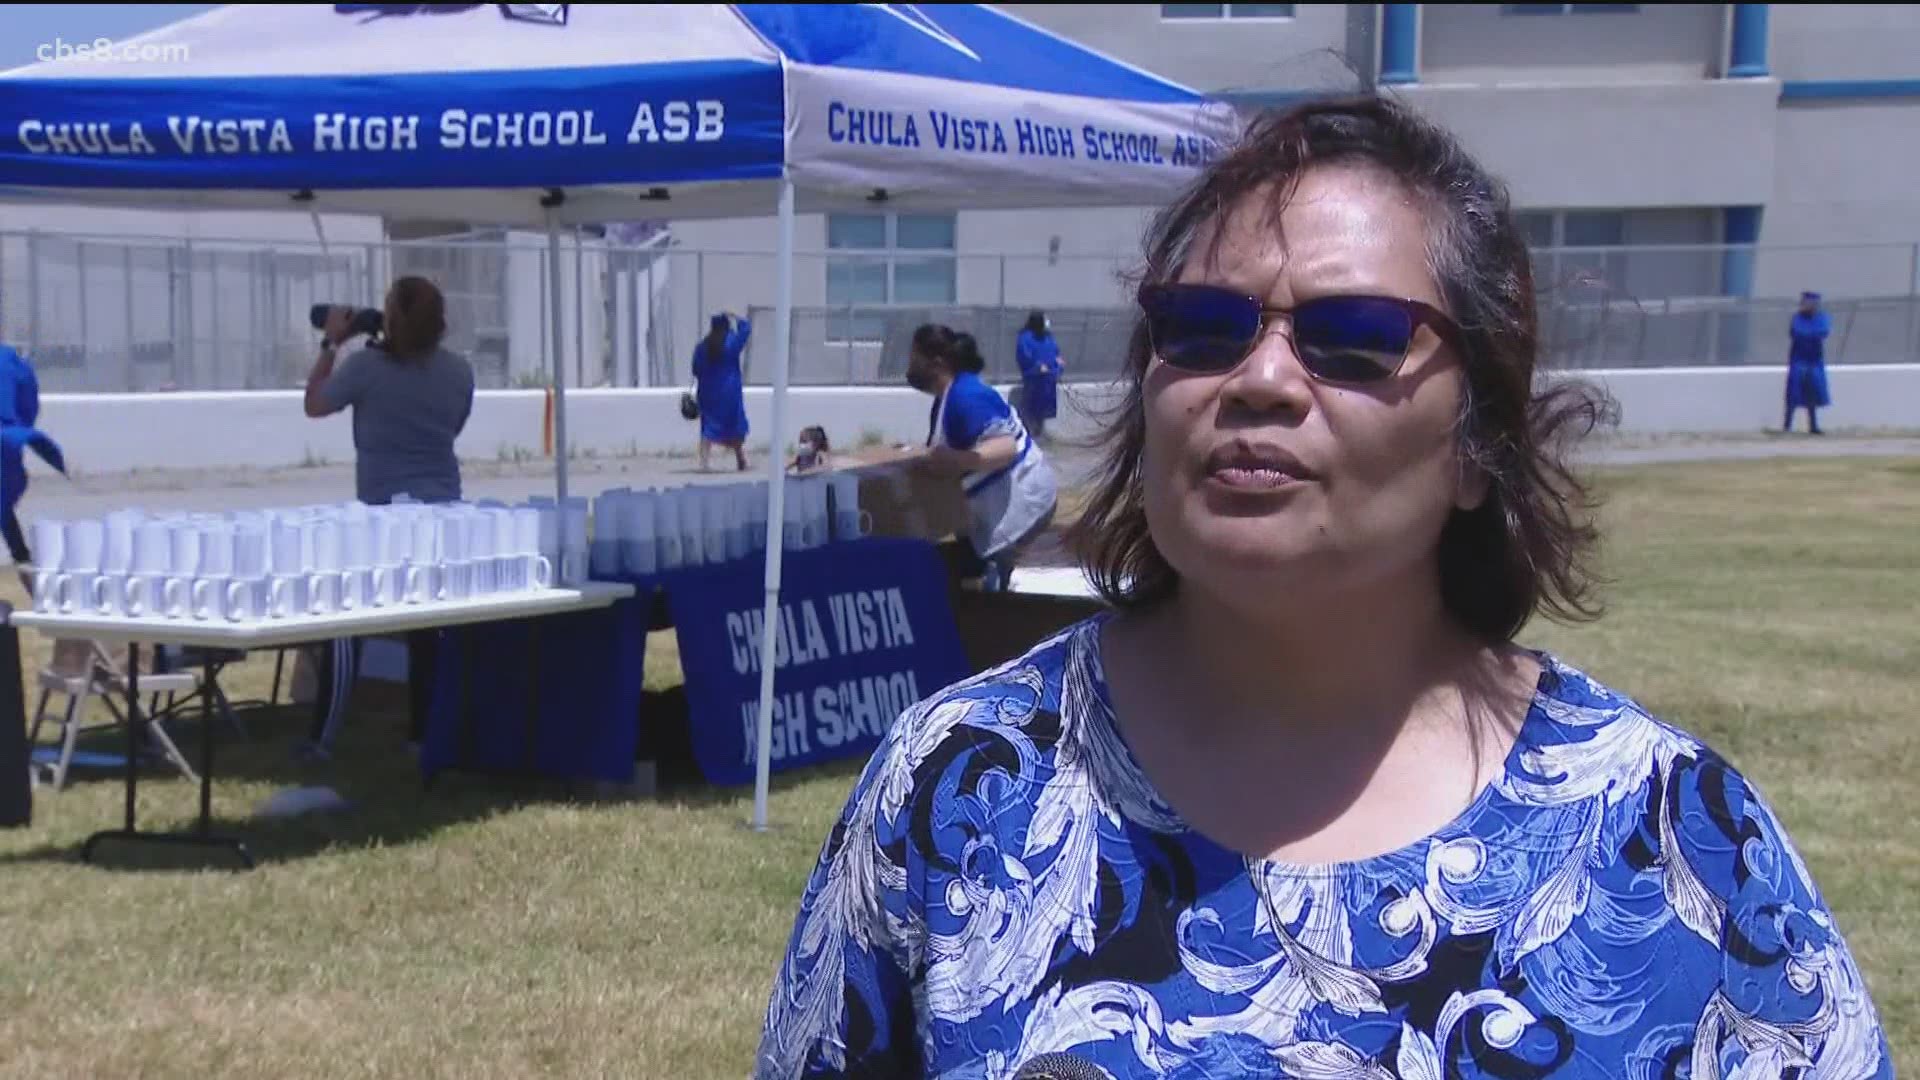 There is a new controversy brewing in the Sweetwater Union High School District - this one involving the removal of the principal of Chula Vista High School.